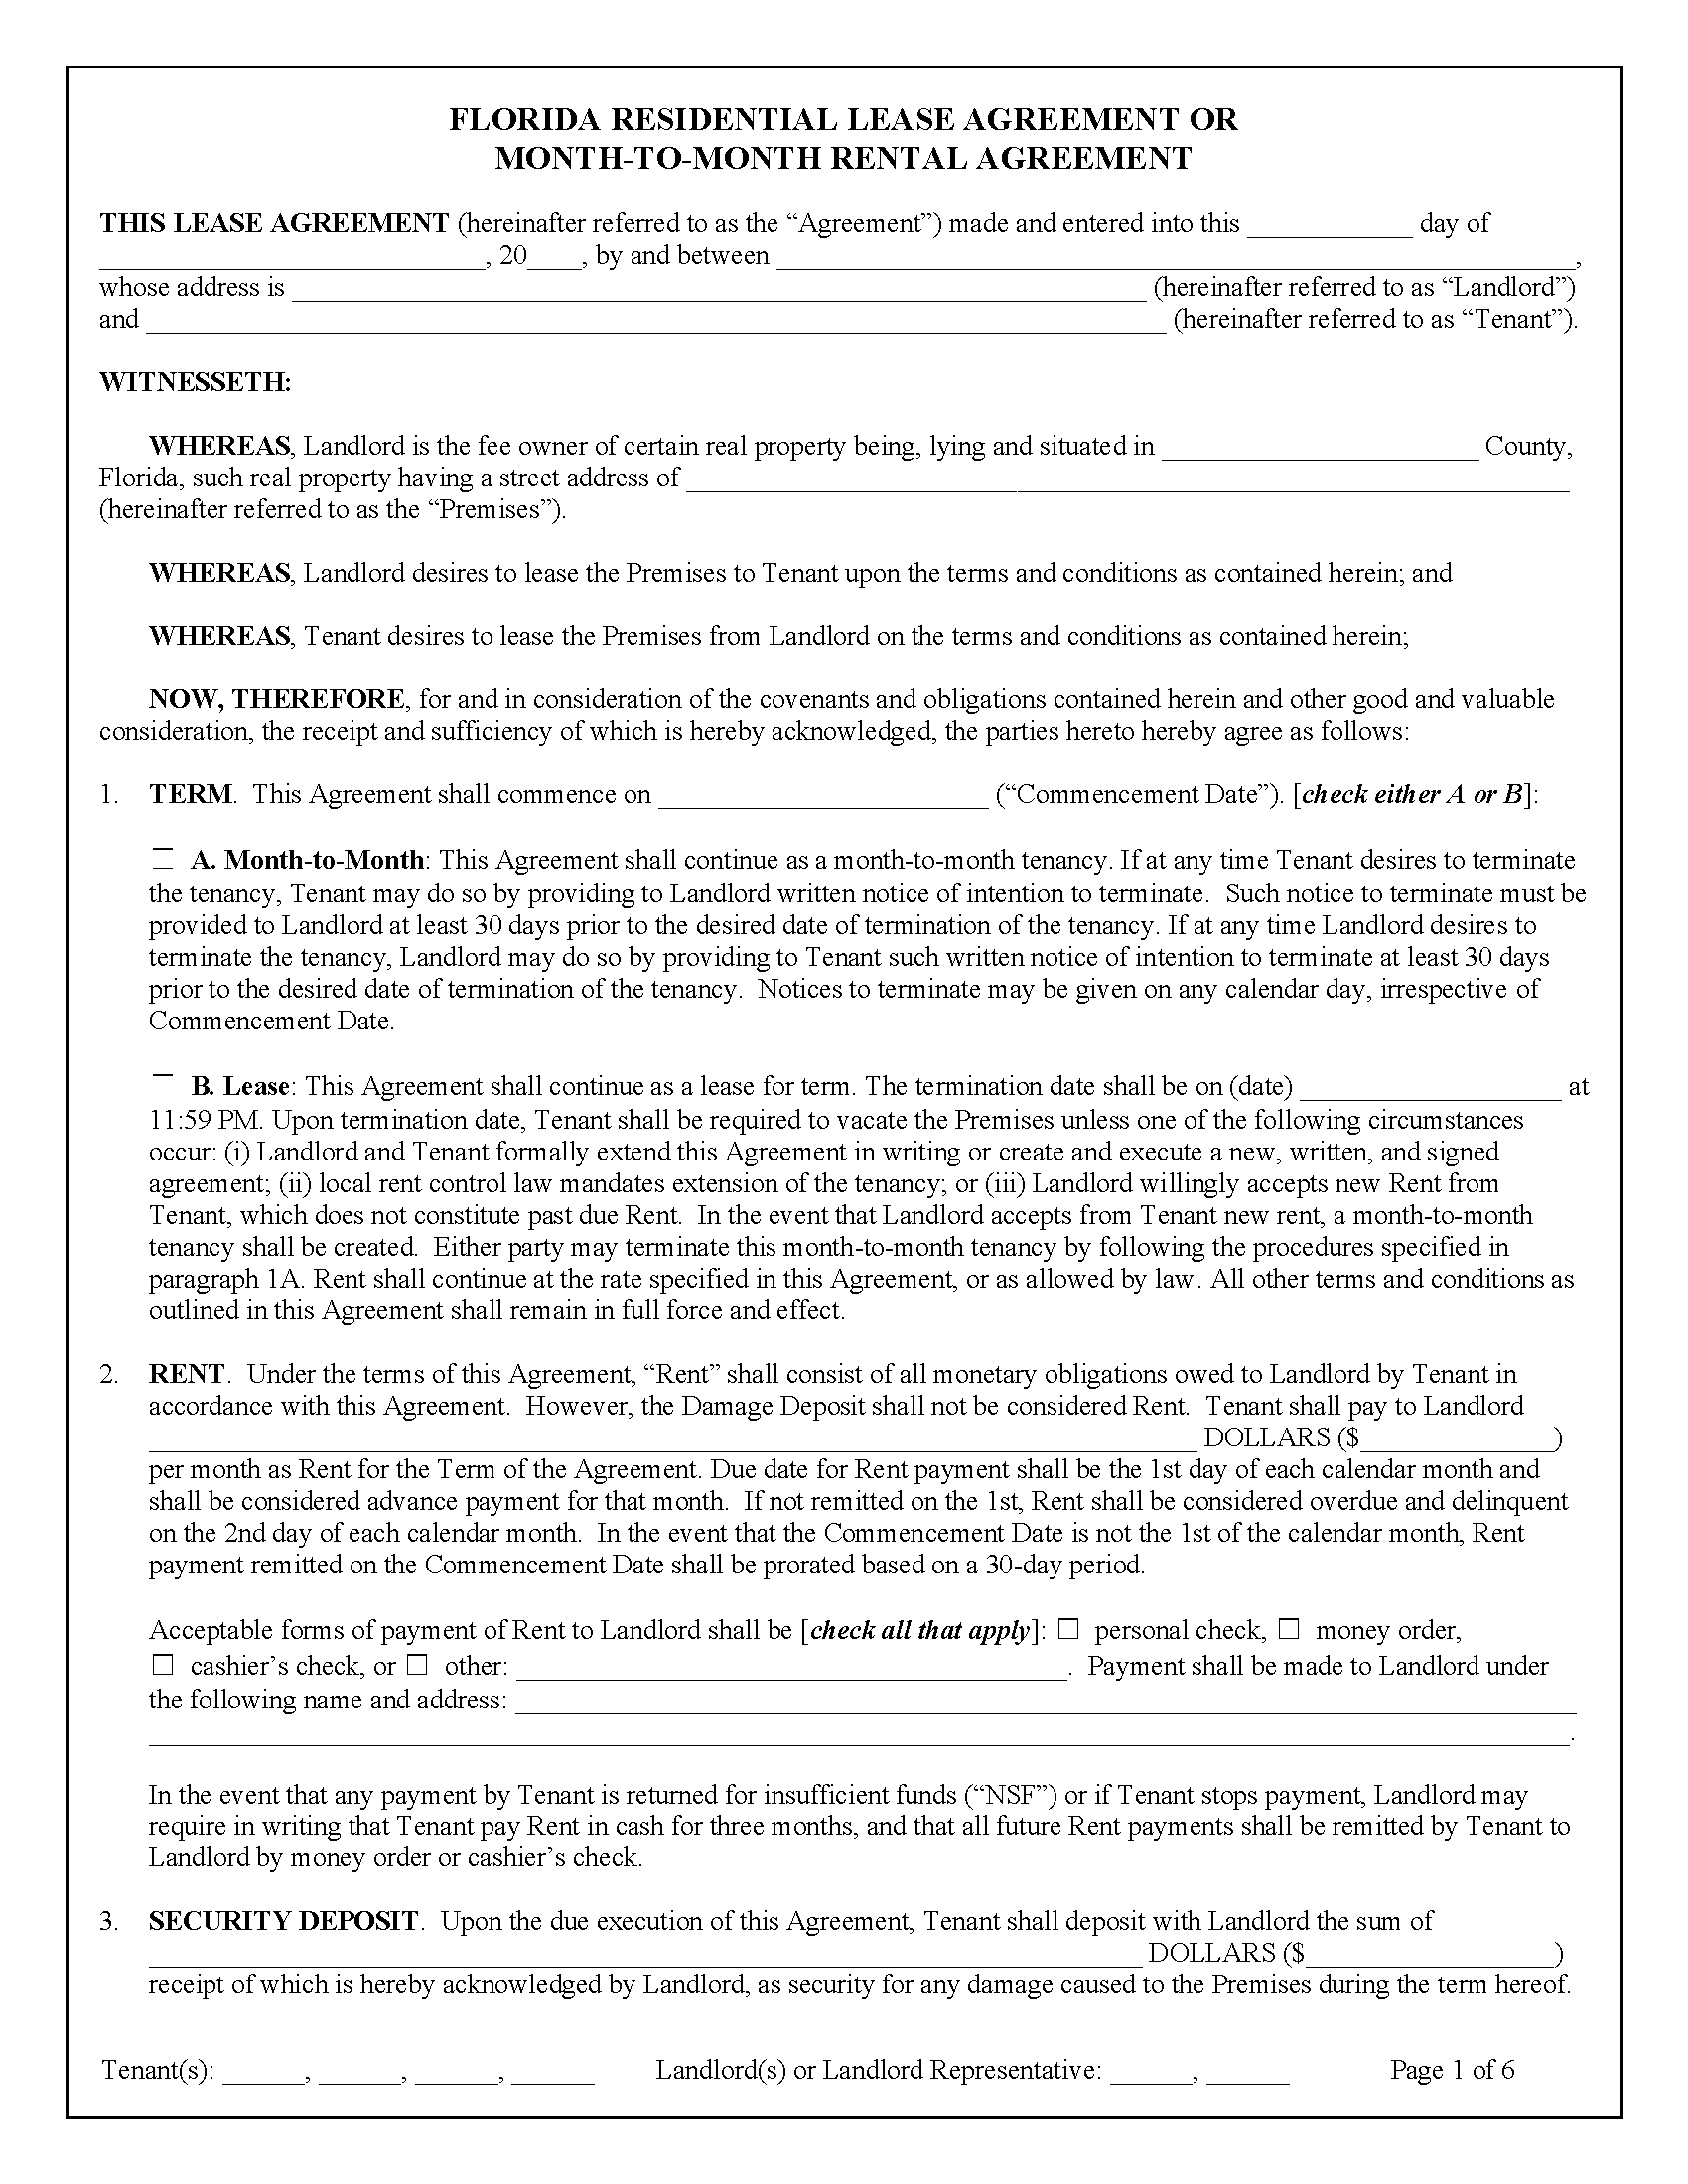 Free Florida Residential Lease Agreement | Pdf with Free Printable Florida Residential Lease Agreement